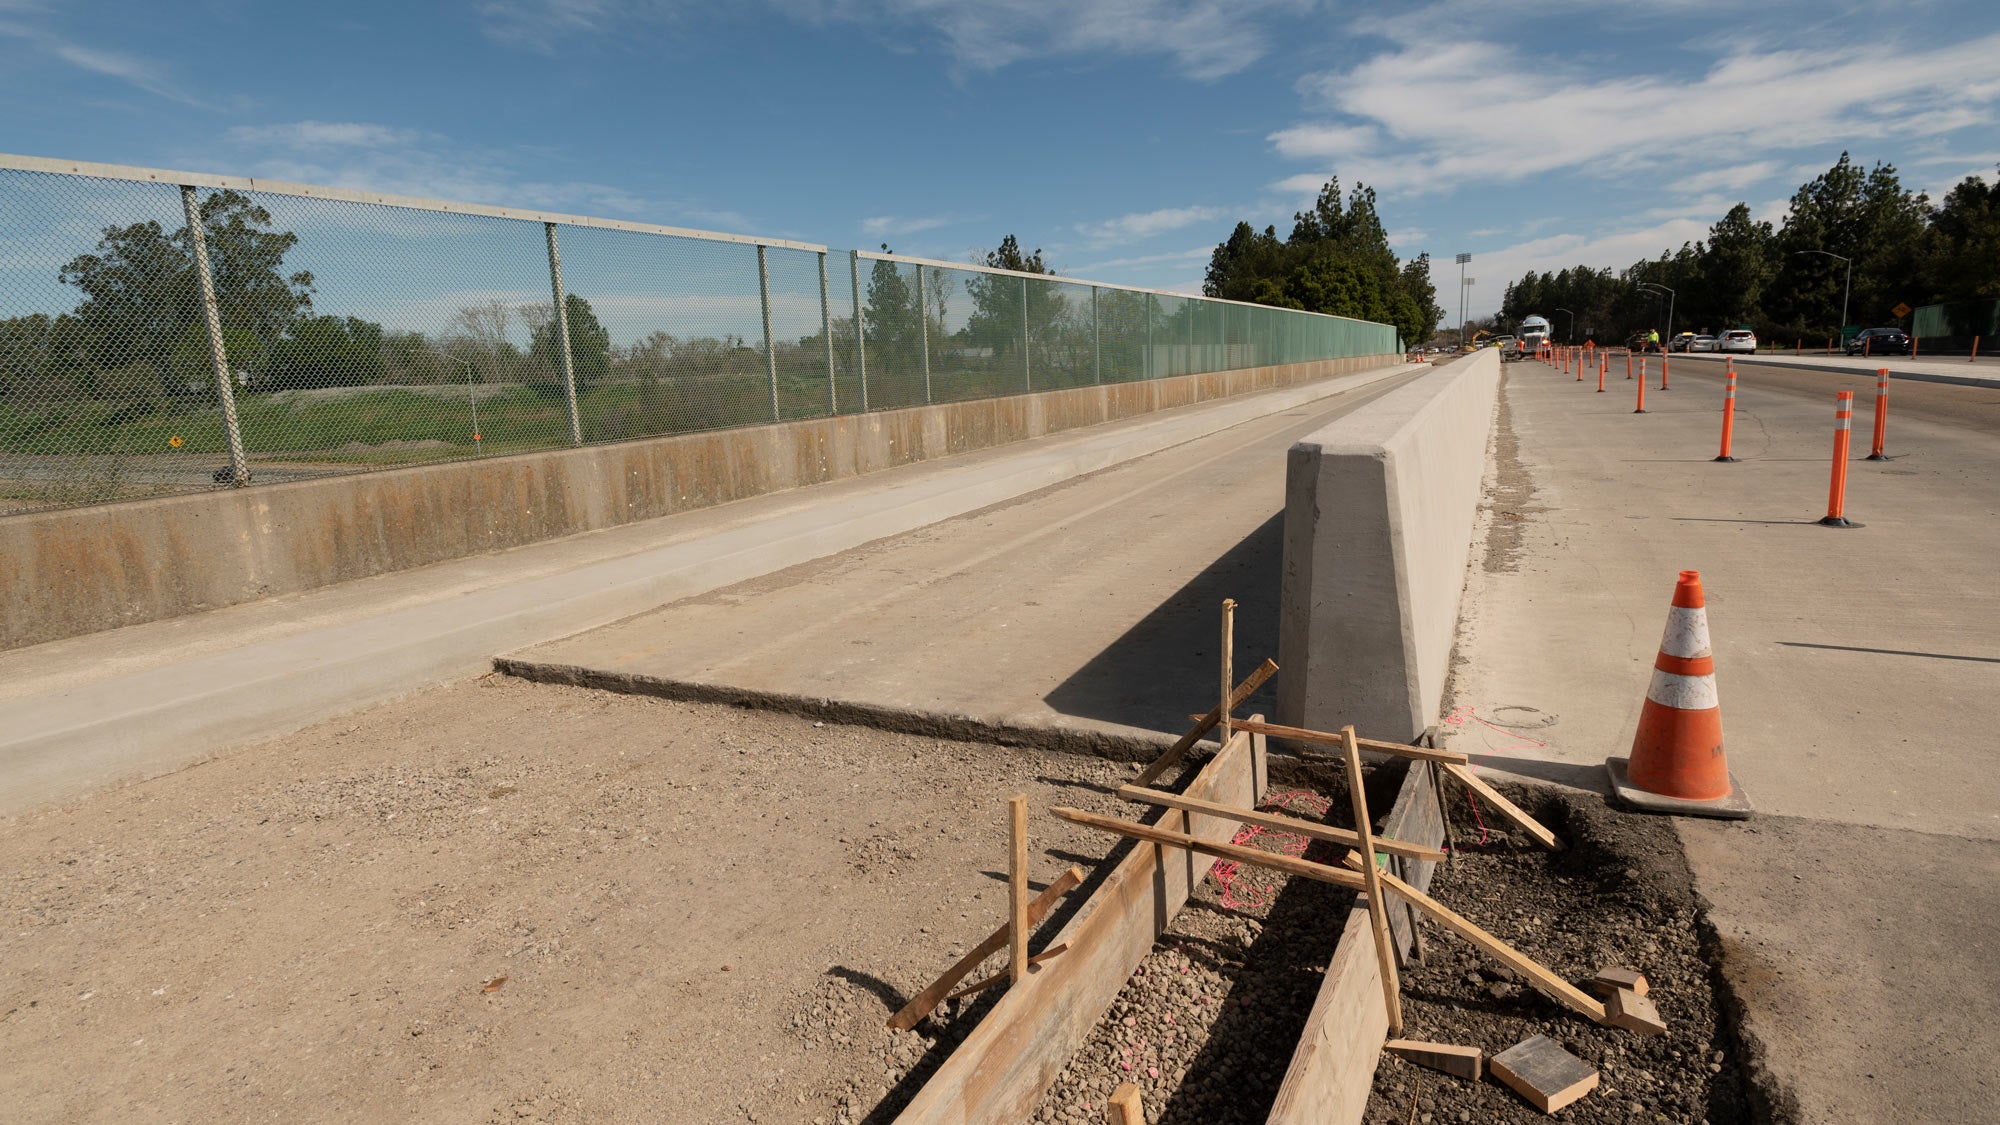 Construction: cocrete barrier separating cycle track (bike lane) and traffic lane